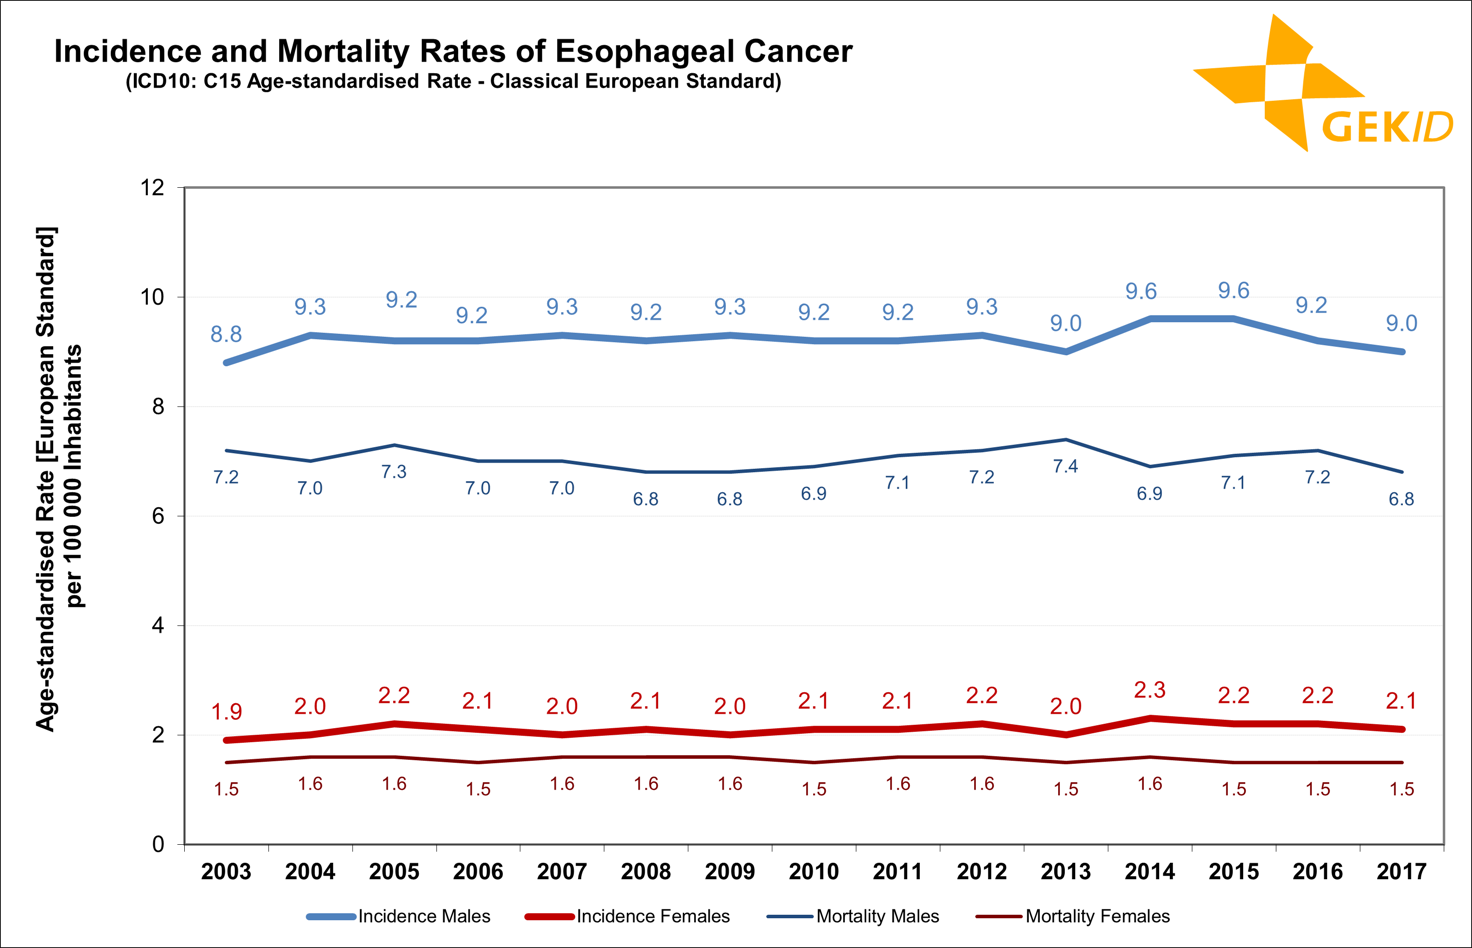 Estimated incidence of esophageal cancer (ICD 10: C15) in Germany